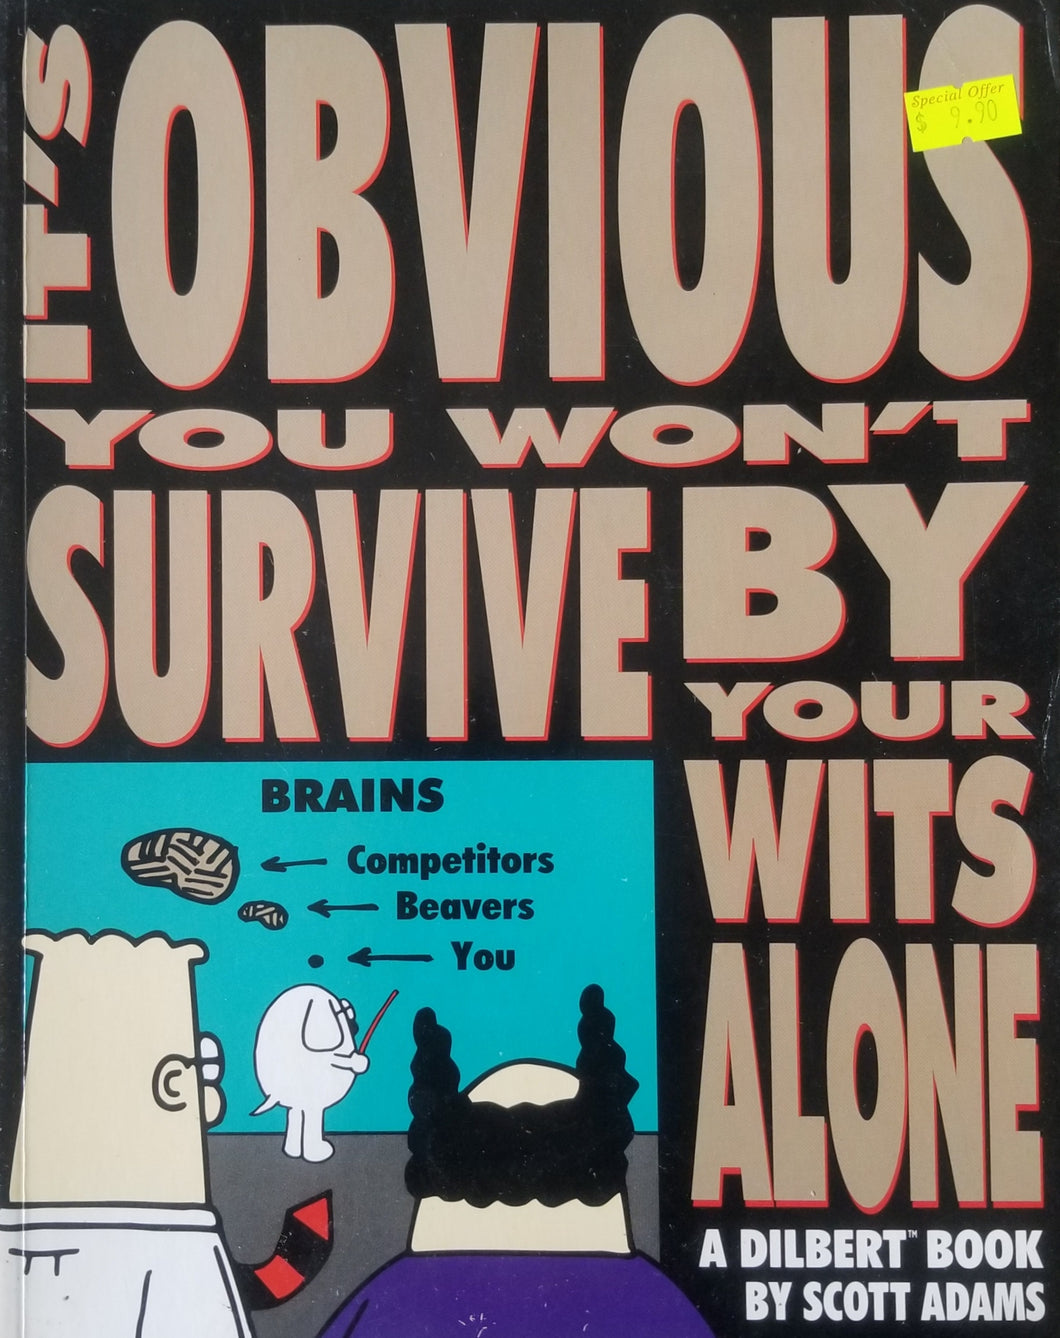 It's Obvious You Won't Survive by Your Wit- Scott Adams